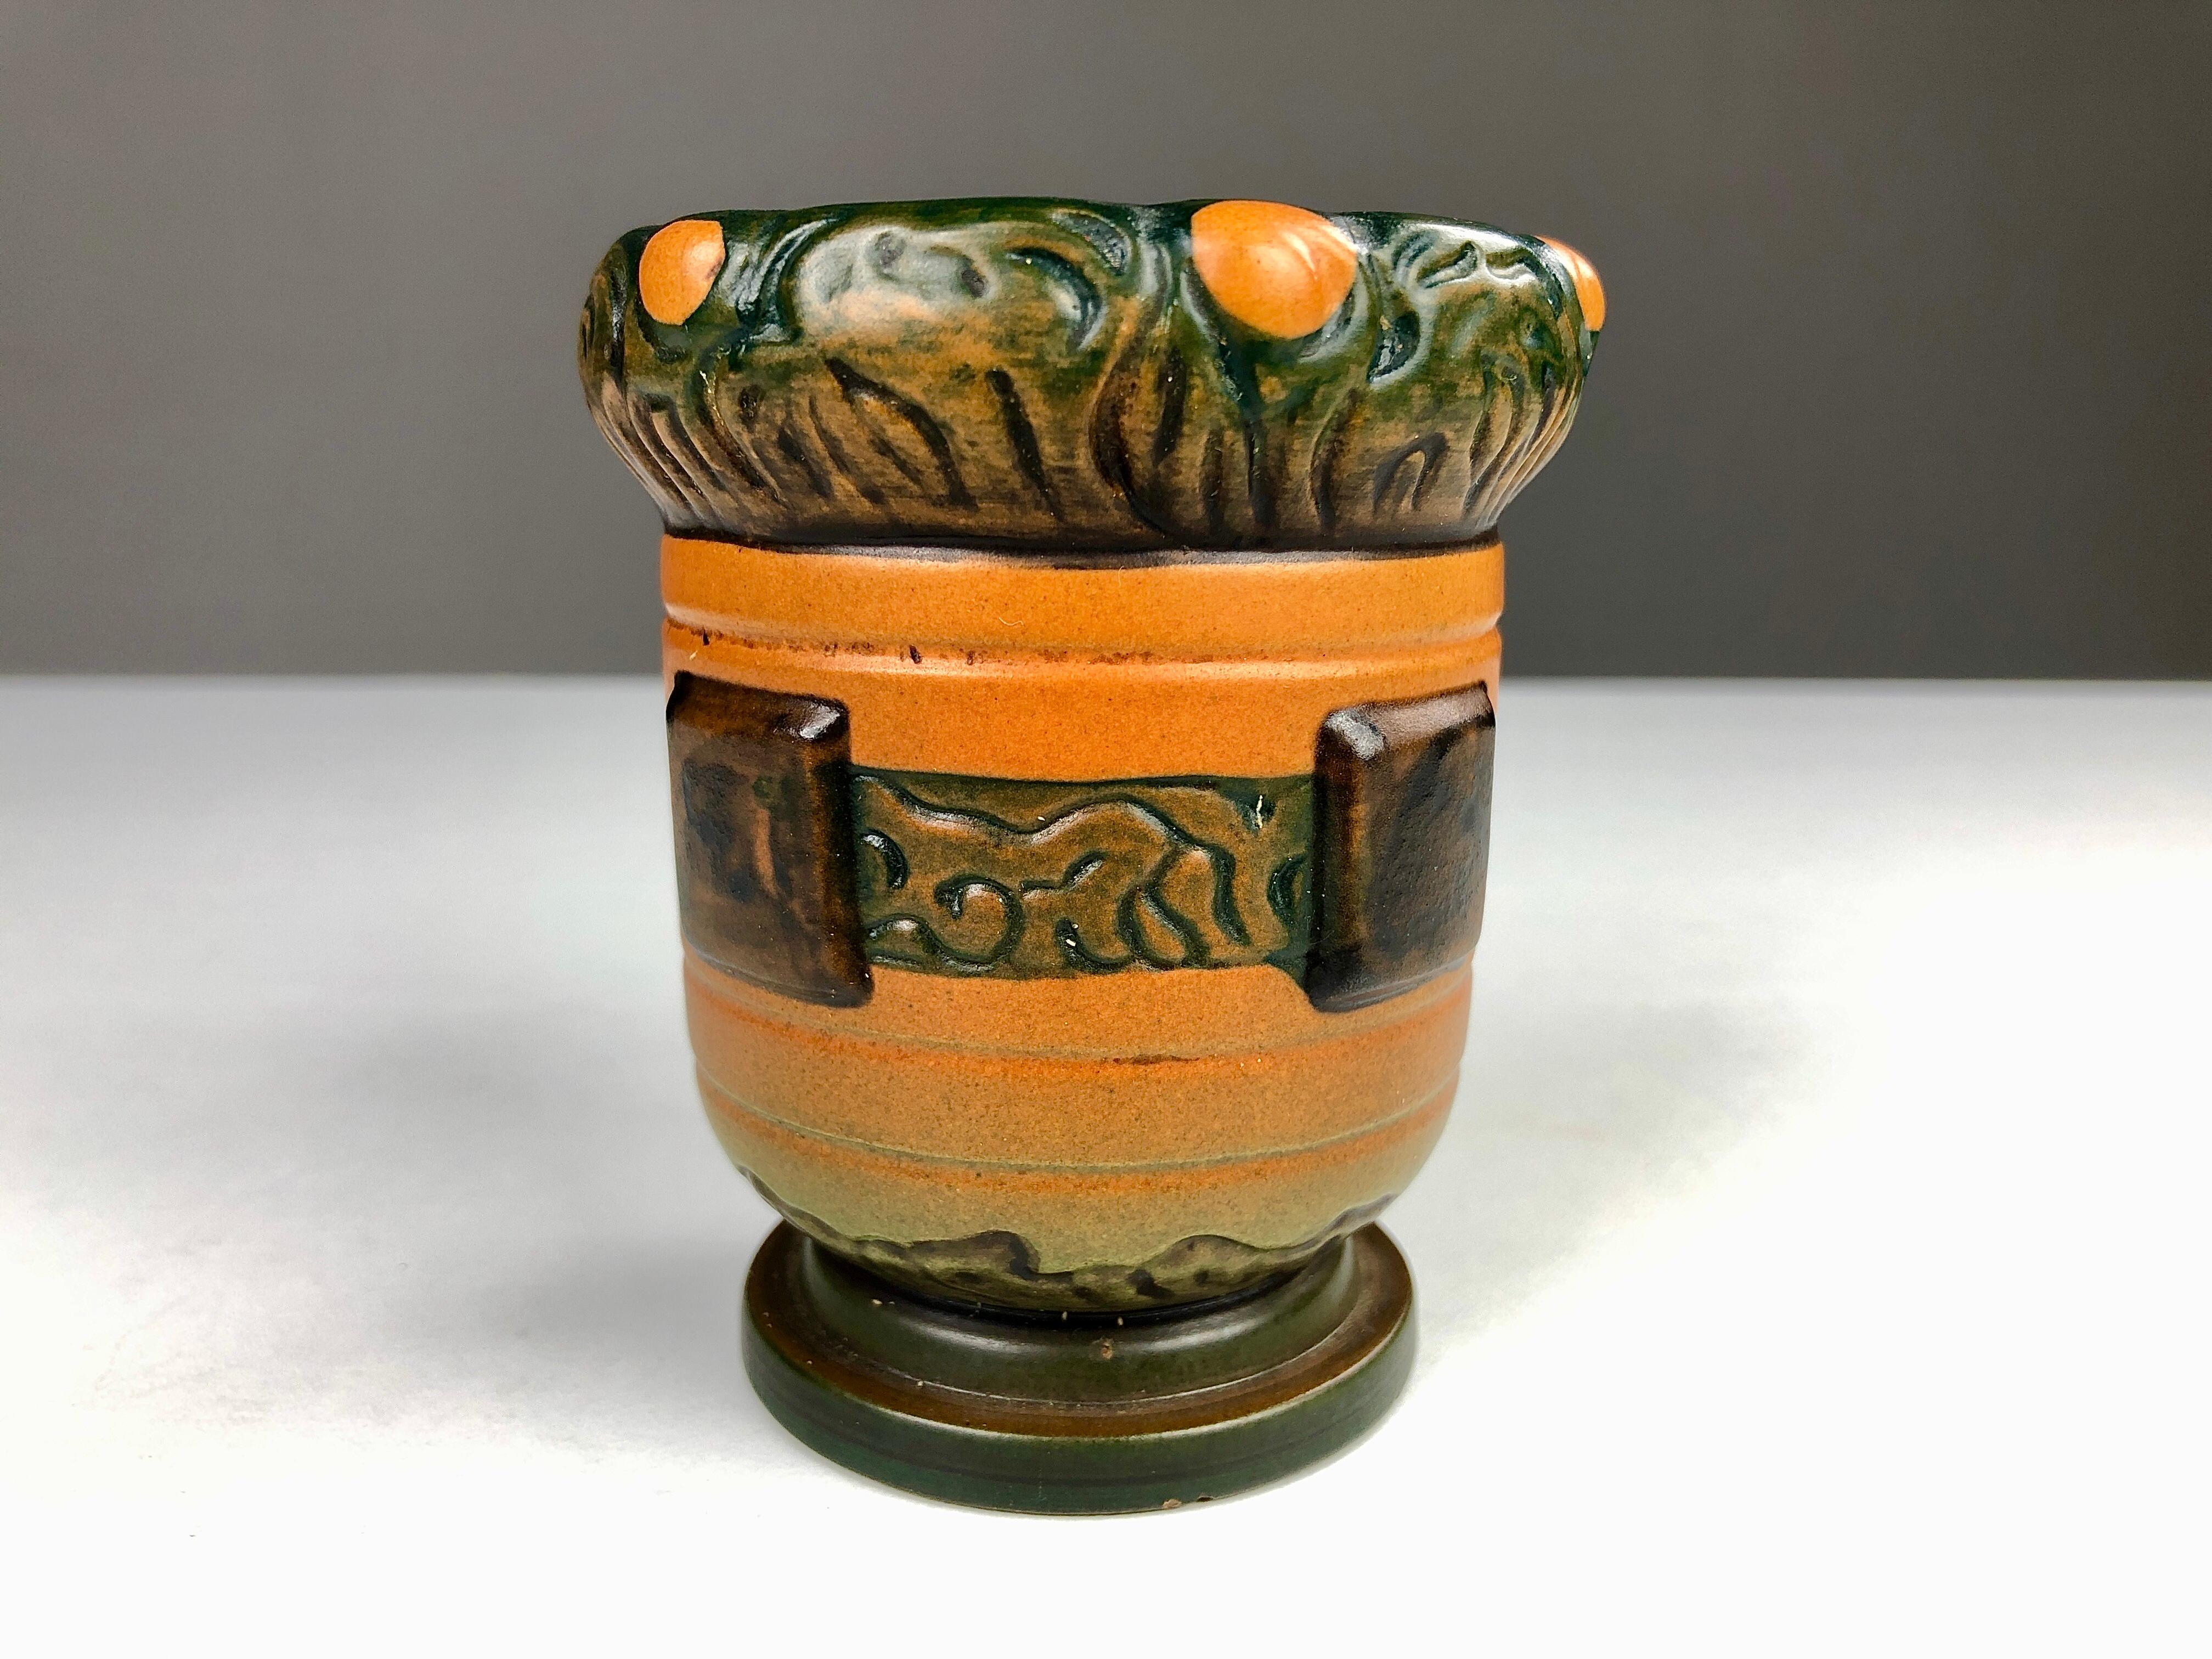 Small Danish Art Nouveau vase by Thorvald Bindesboell for P. Ipsens Enke designed in 1905

The vase is in good vintage condition

Thorvald Bindesbøll (1846-1908) is was Denmark's leading ornamental artist of his time. His pronounced independence and